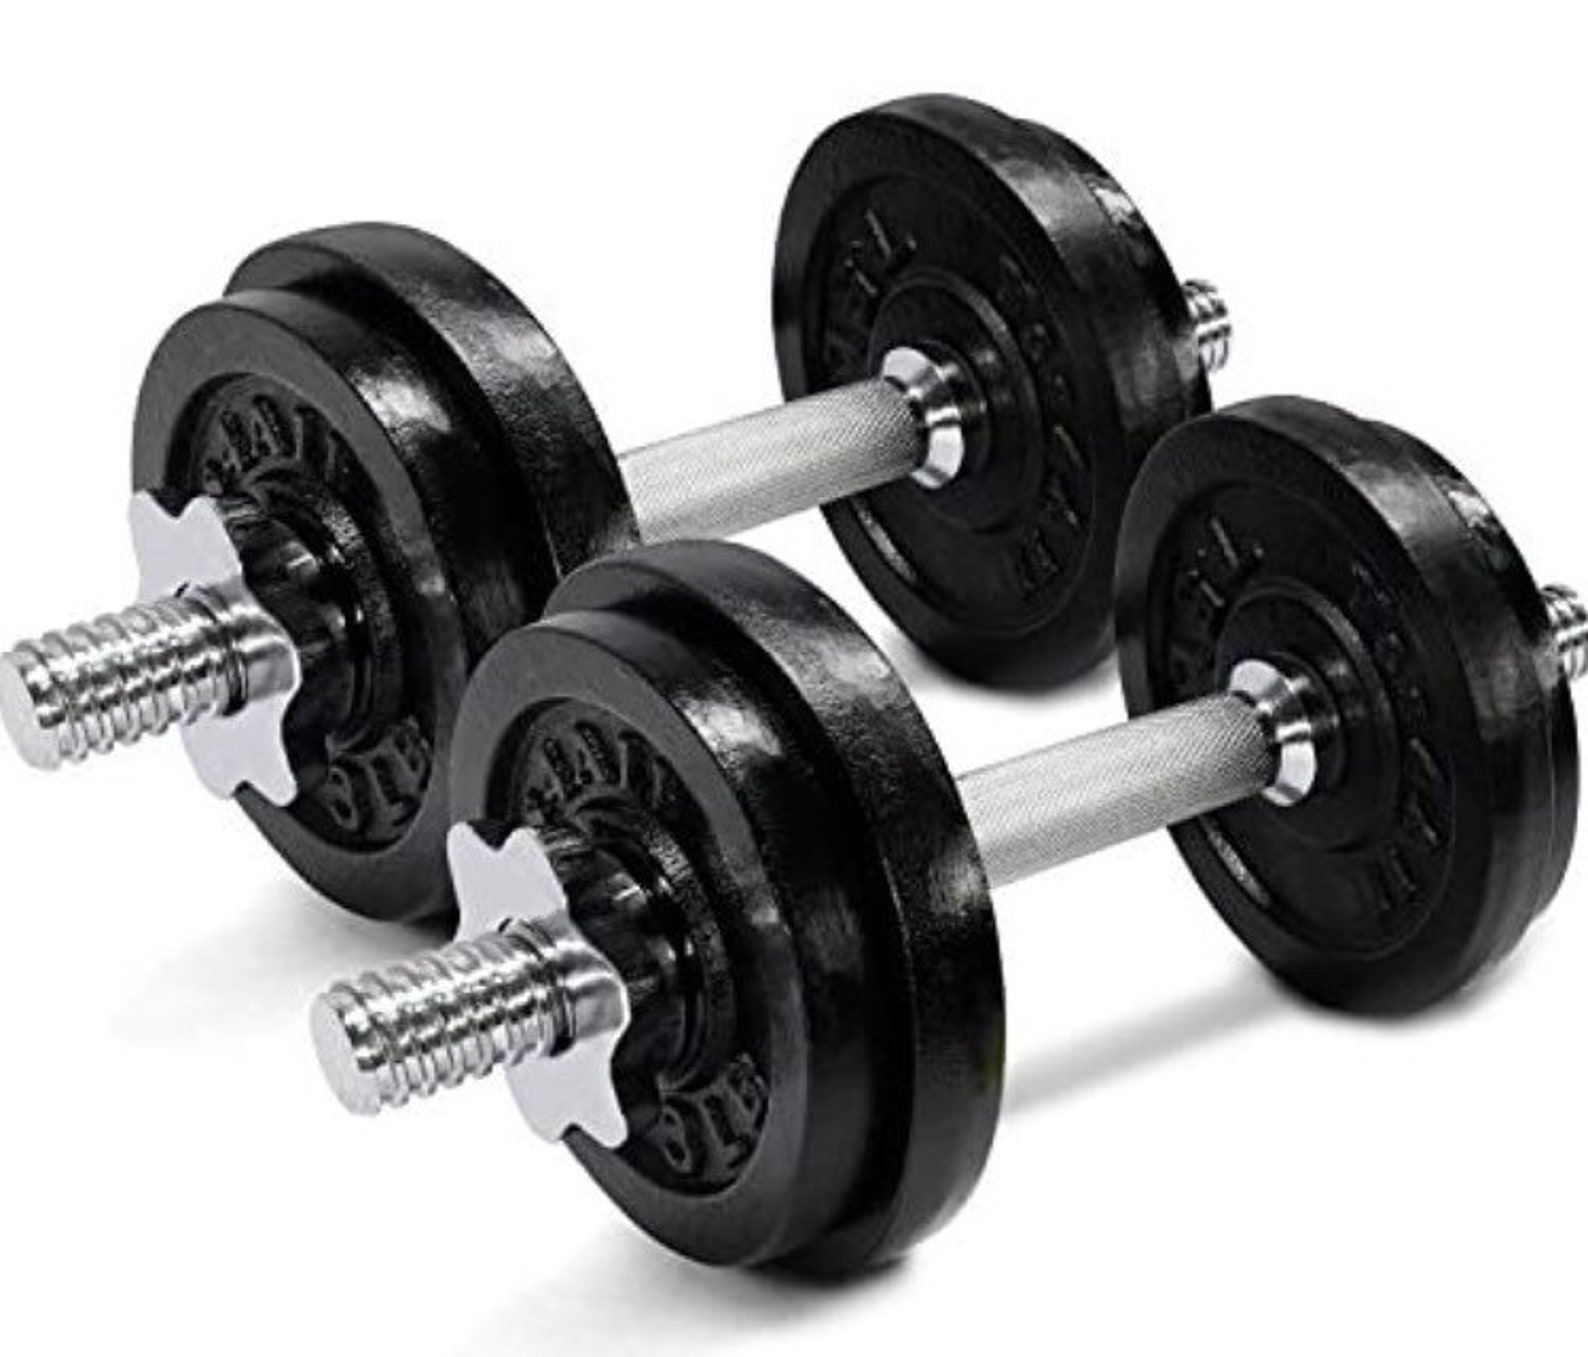 Yes4All Adjustable Dumbbells 40 50 52.5 60 105 to 200 lbs image 0.